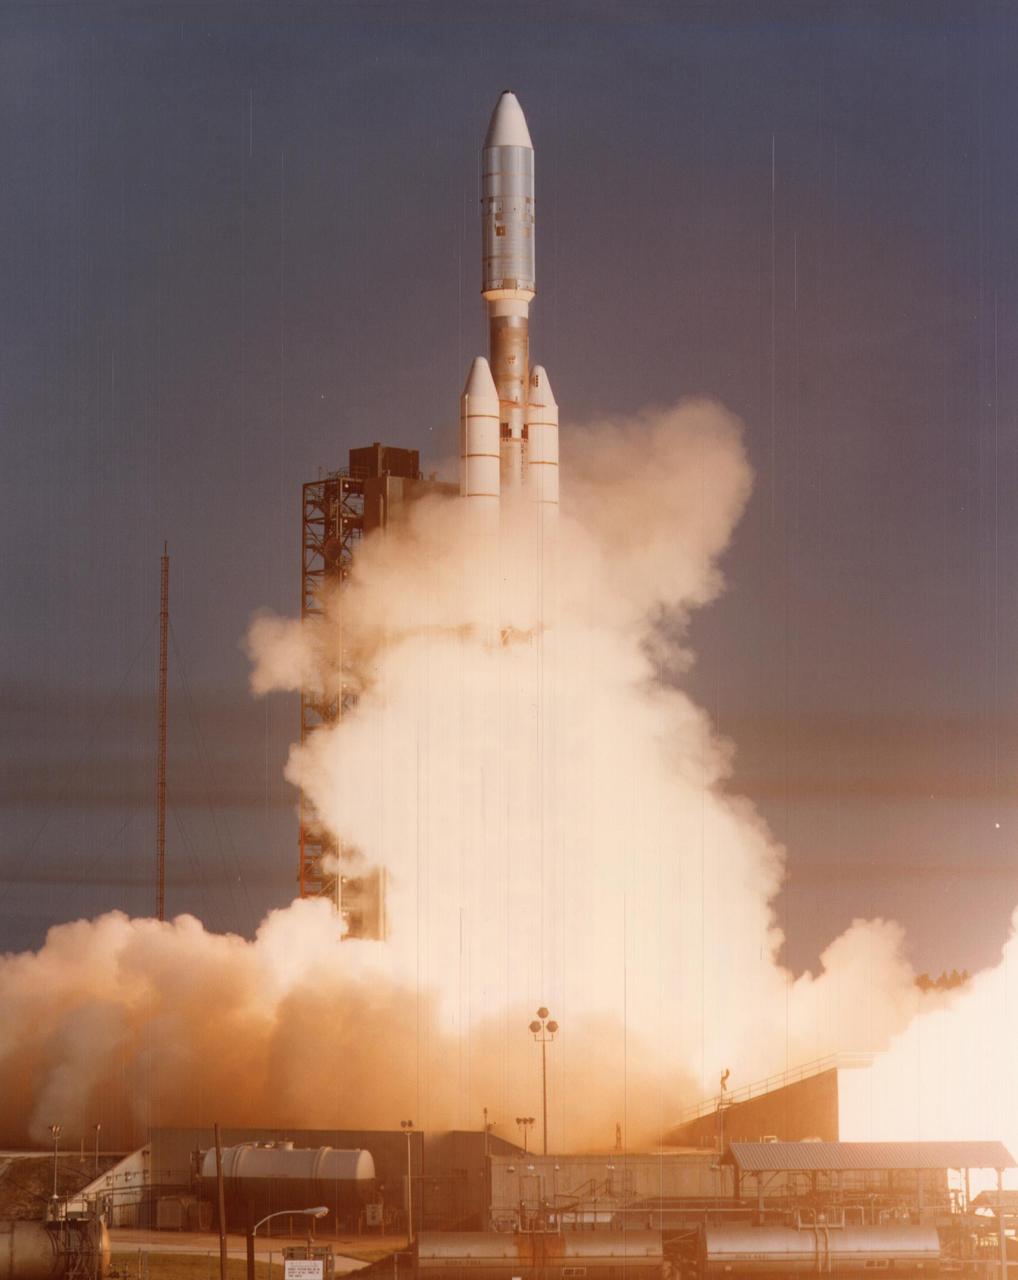 Voyager 1 begins its voyage into the cosmos from Kennedy Space Center, Florida, on 5 September 1977